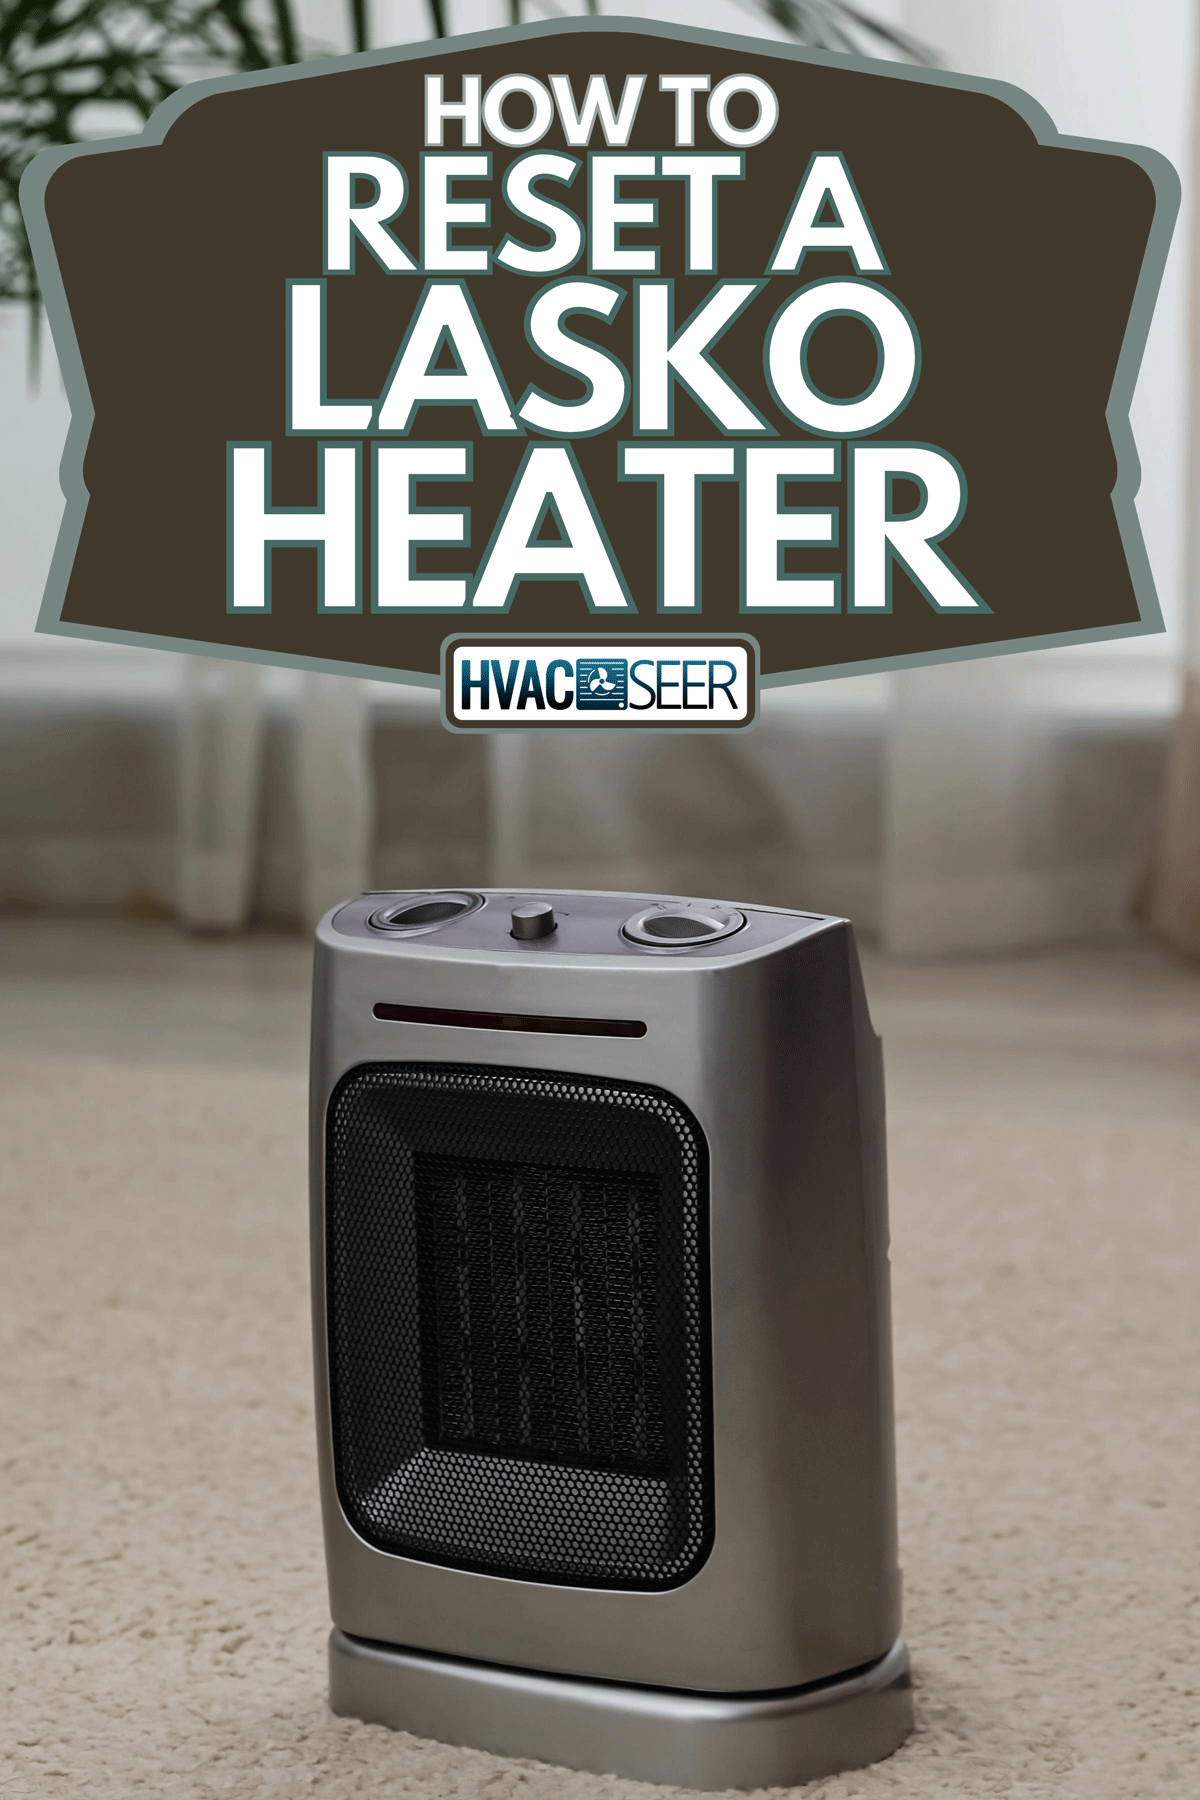 Halogen heater in the floor of the house, How To Reset A Lasko Heater